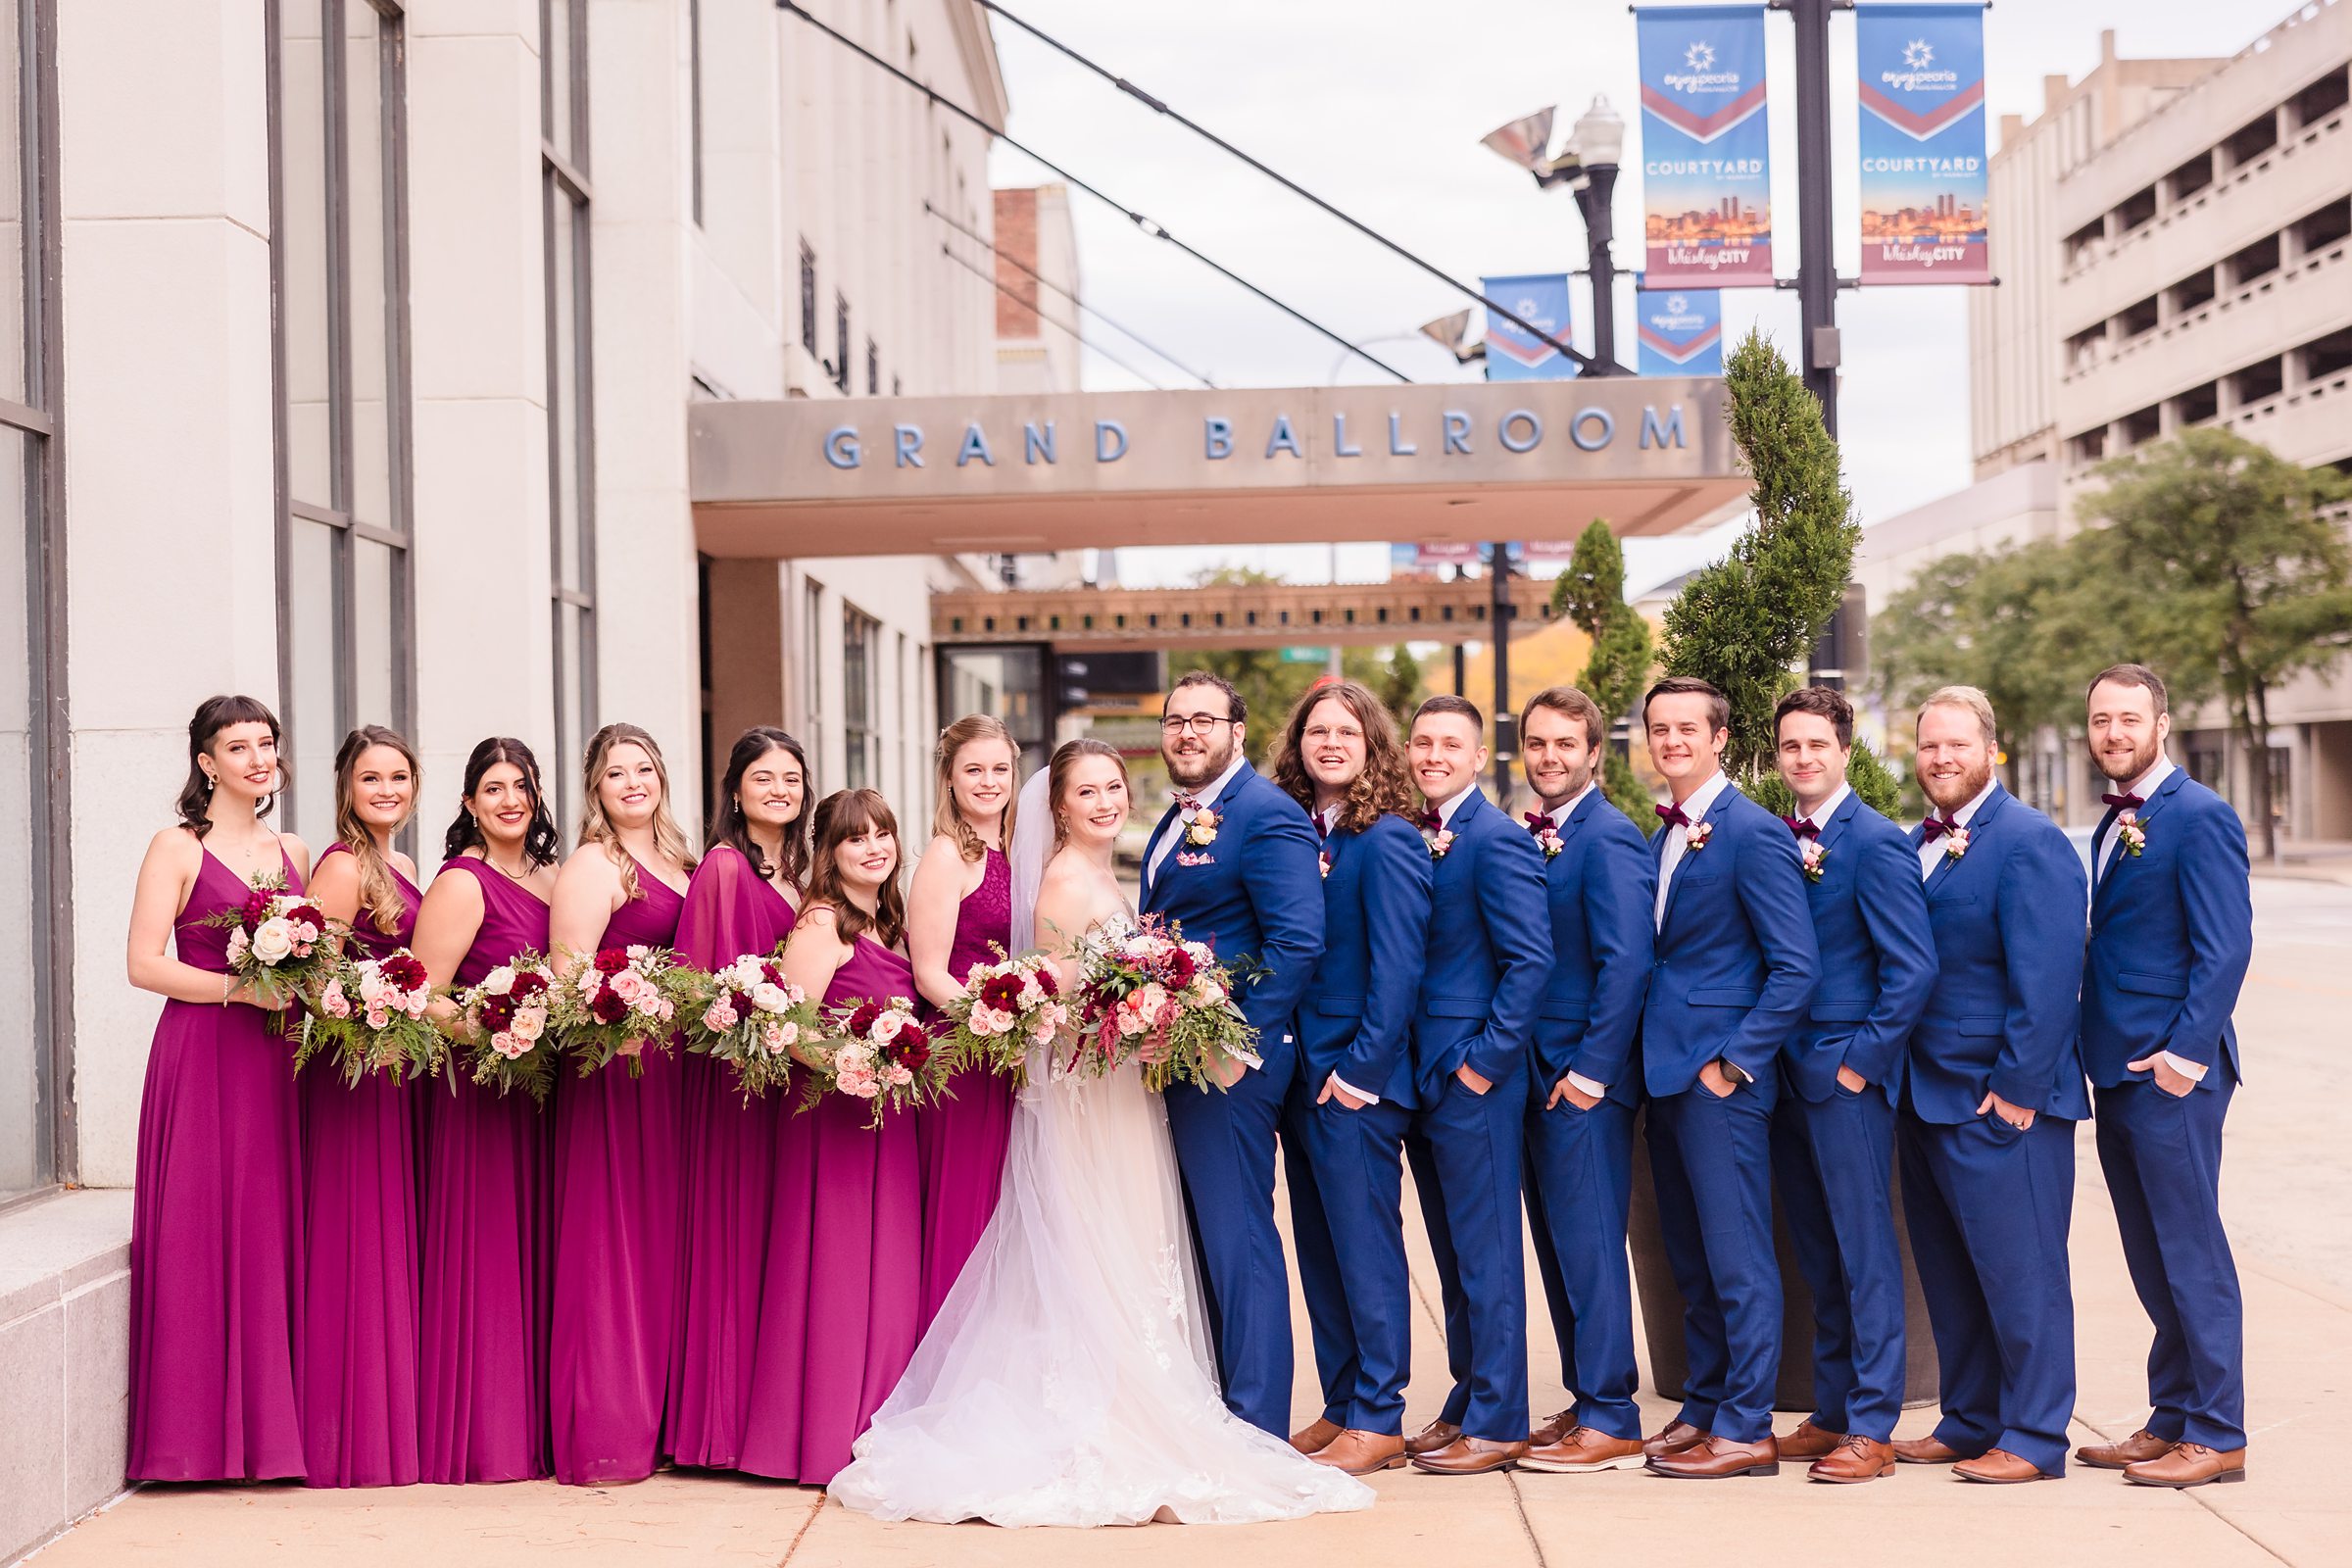 Full bridal party at the Hotel Pere Marquette in Peoria, Illinois.